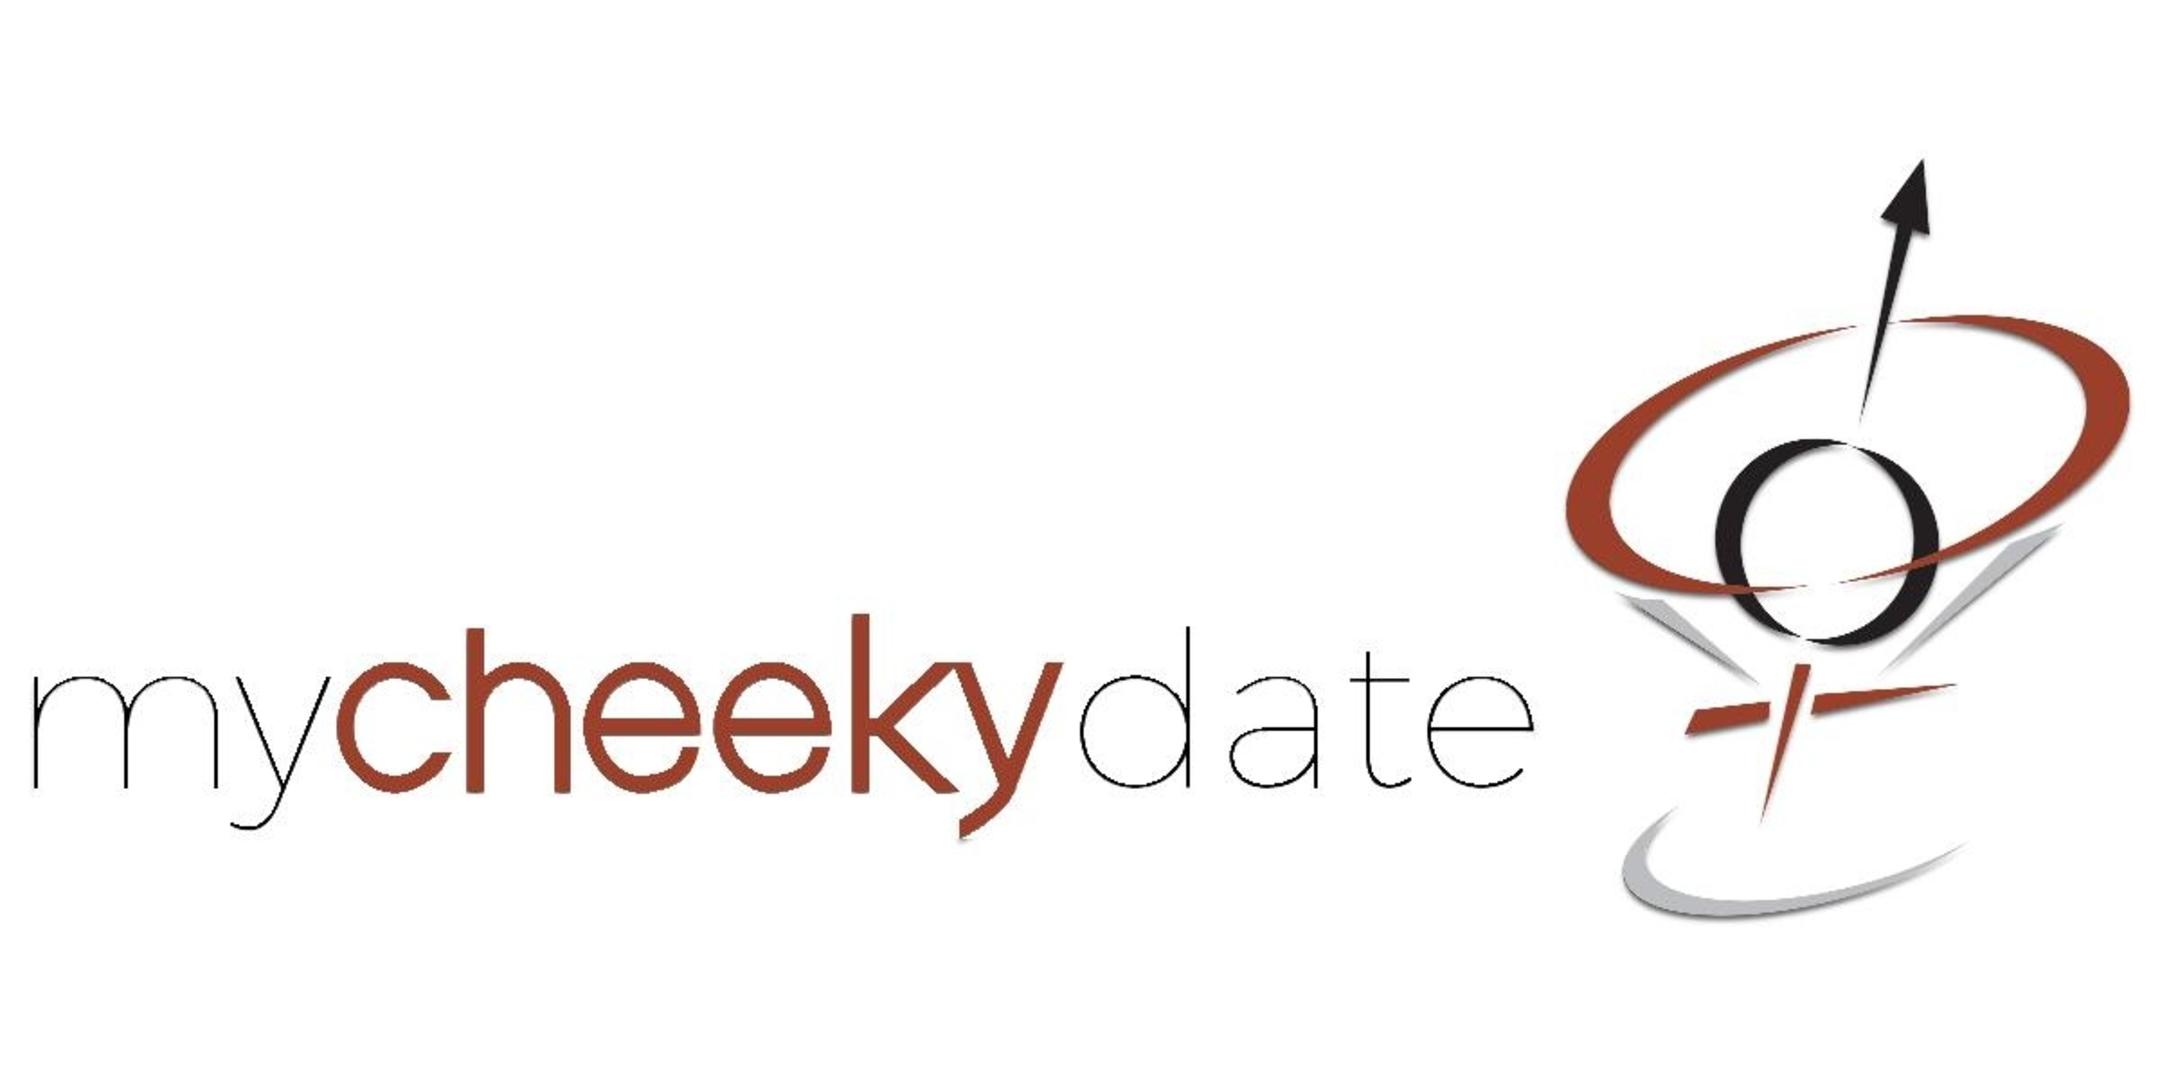 Oakland Friday Night Singles Event | Speed Date | Ages 24-36 | Let's Get Cheeky!